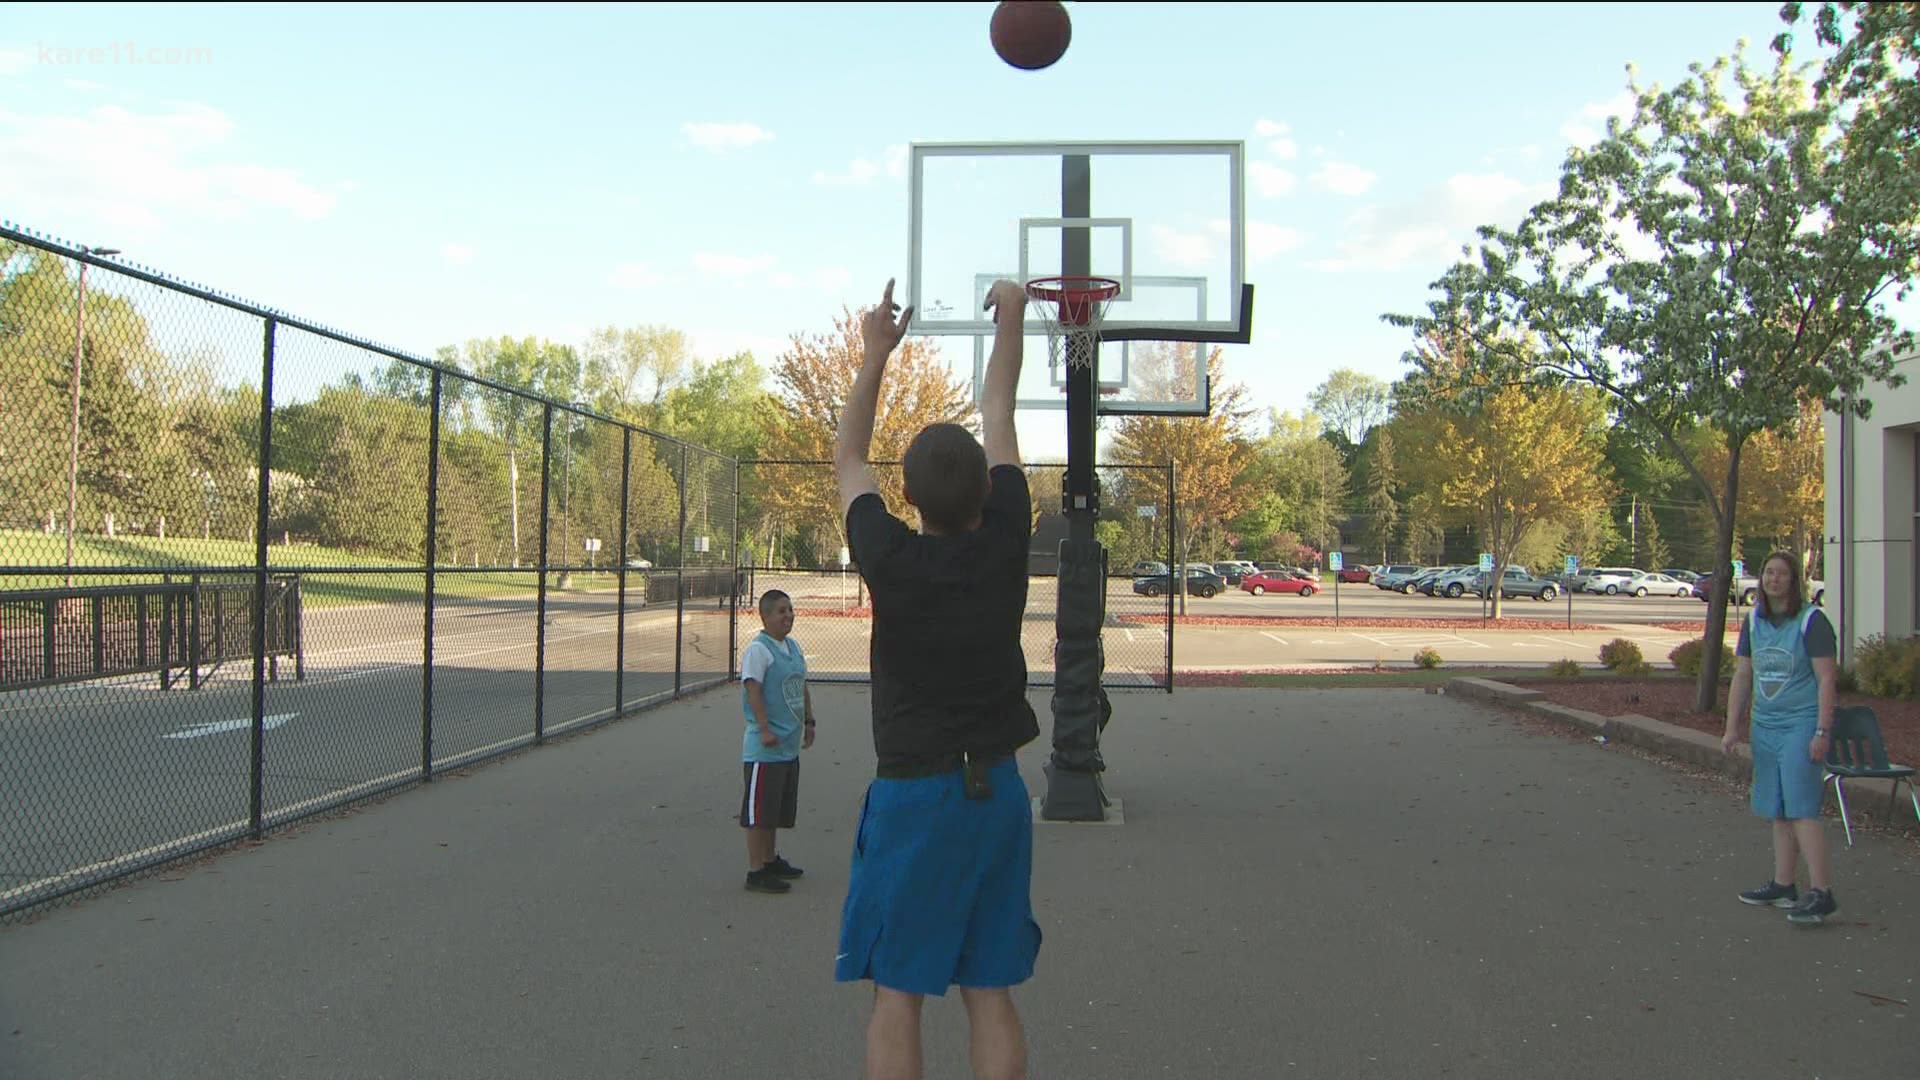 Special Olympics Minnesota is sponsoring a 24-hour free throw event this weekend